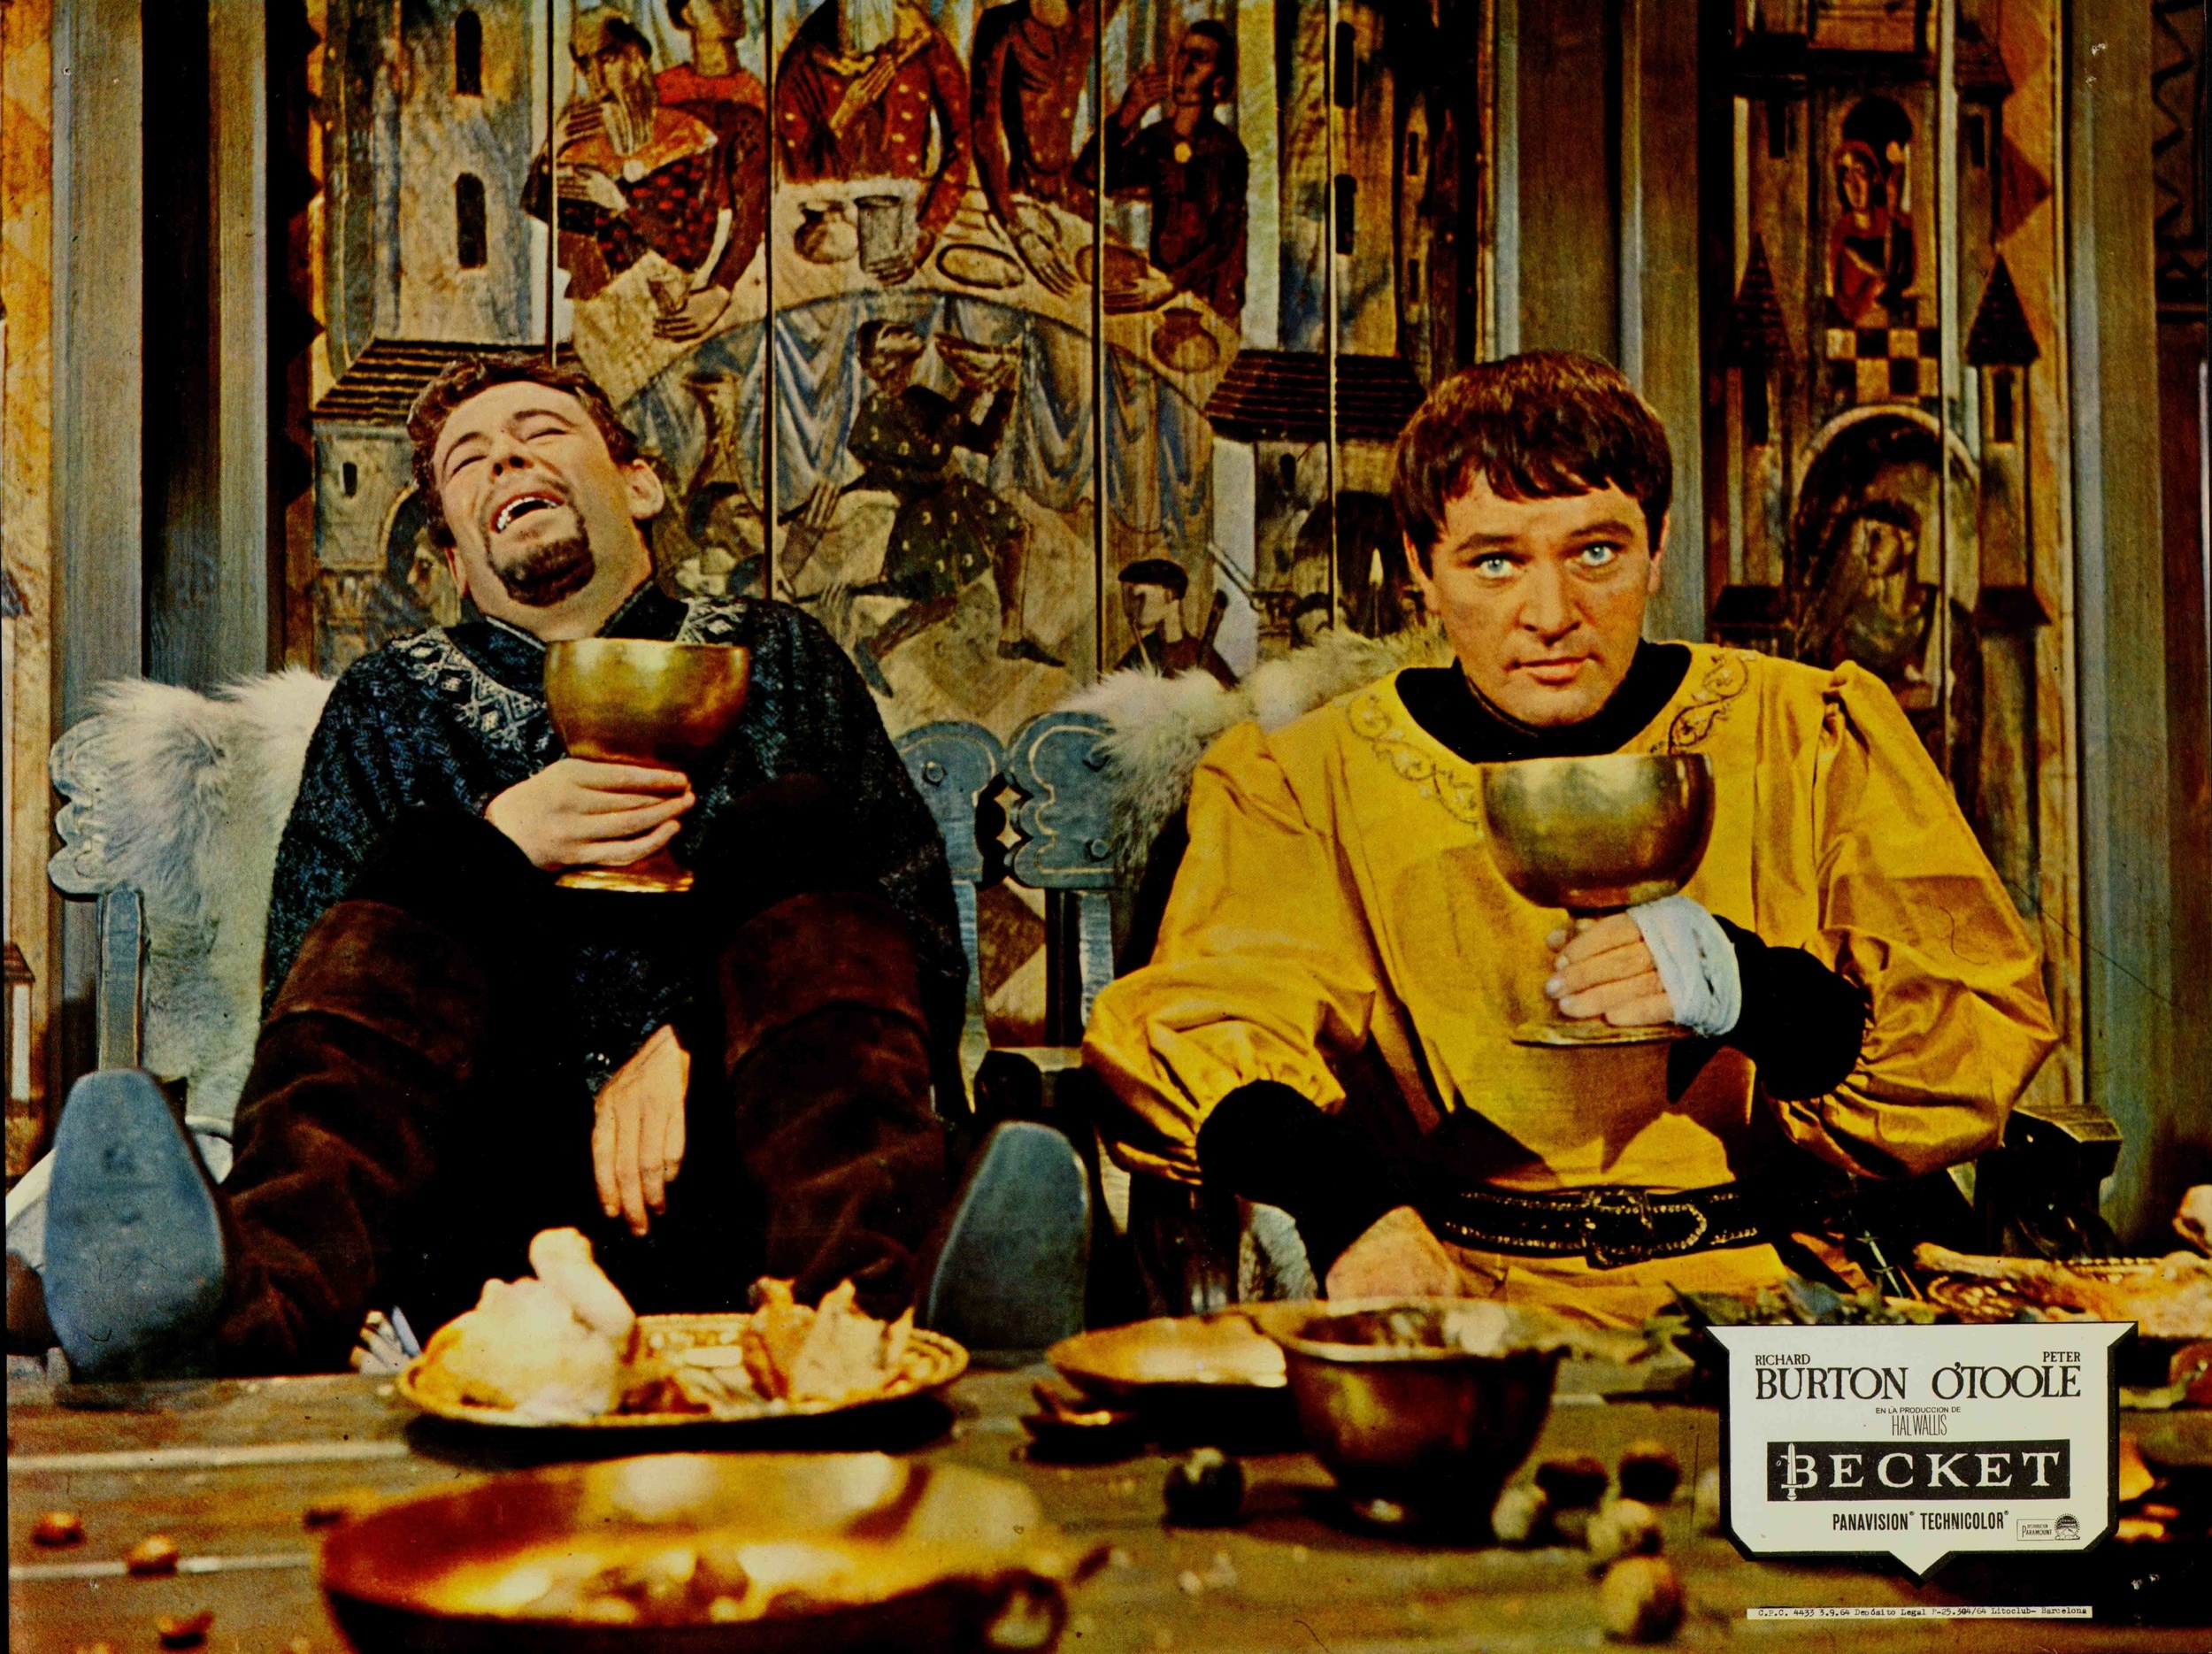 <p>Richard Burton is back as Thomas Becket, who was Archibishop of Canterbury and a key person in the life of Henry II. This film is about the relationship between the two, which ended with Becket effectively martyred. Peter O’Toole played Henry II, and the movie won Best Adapted Screenplay.</p>